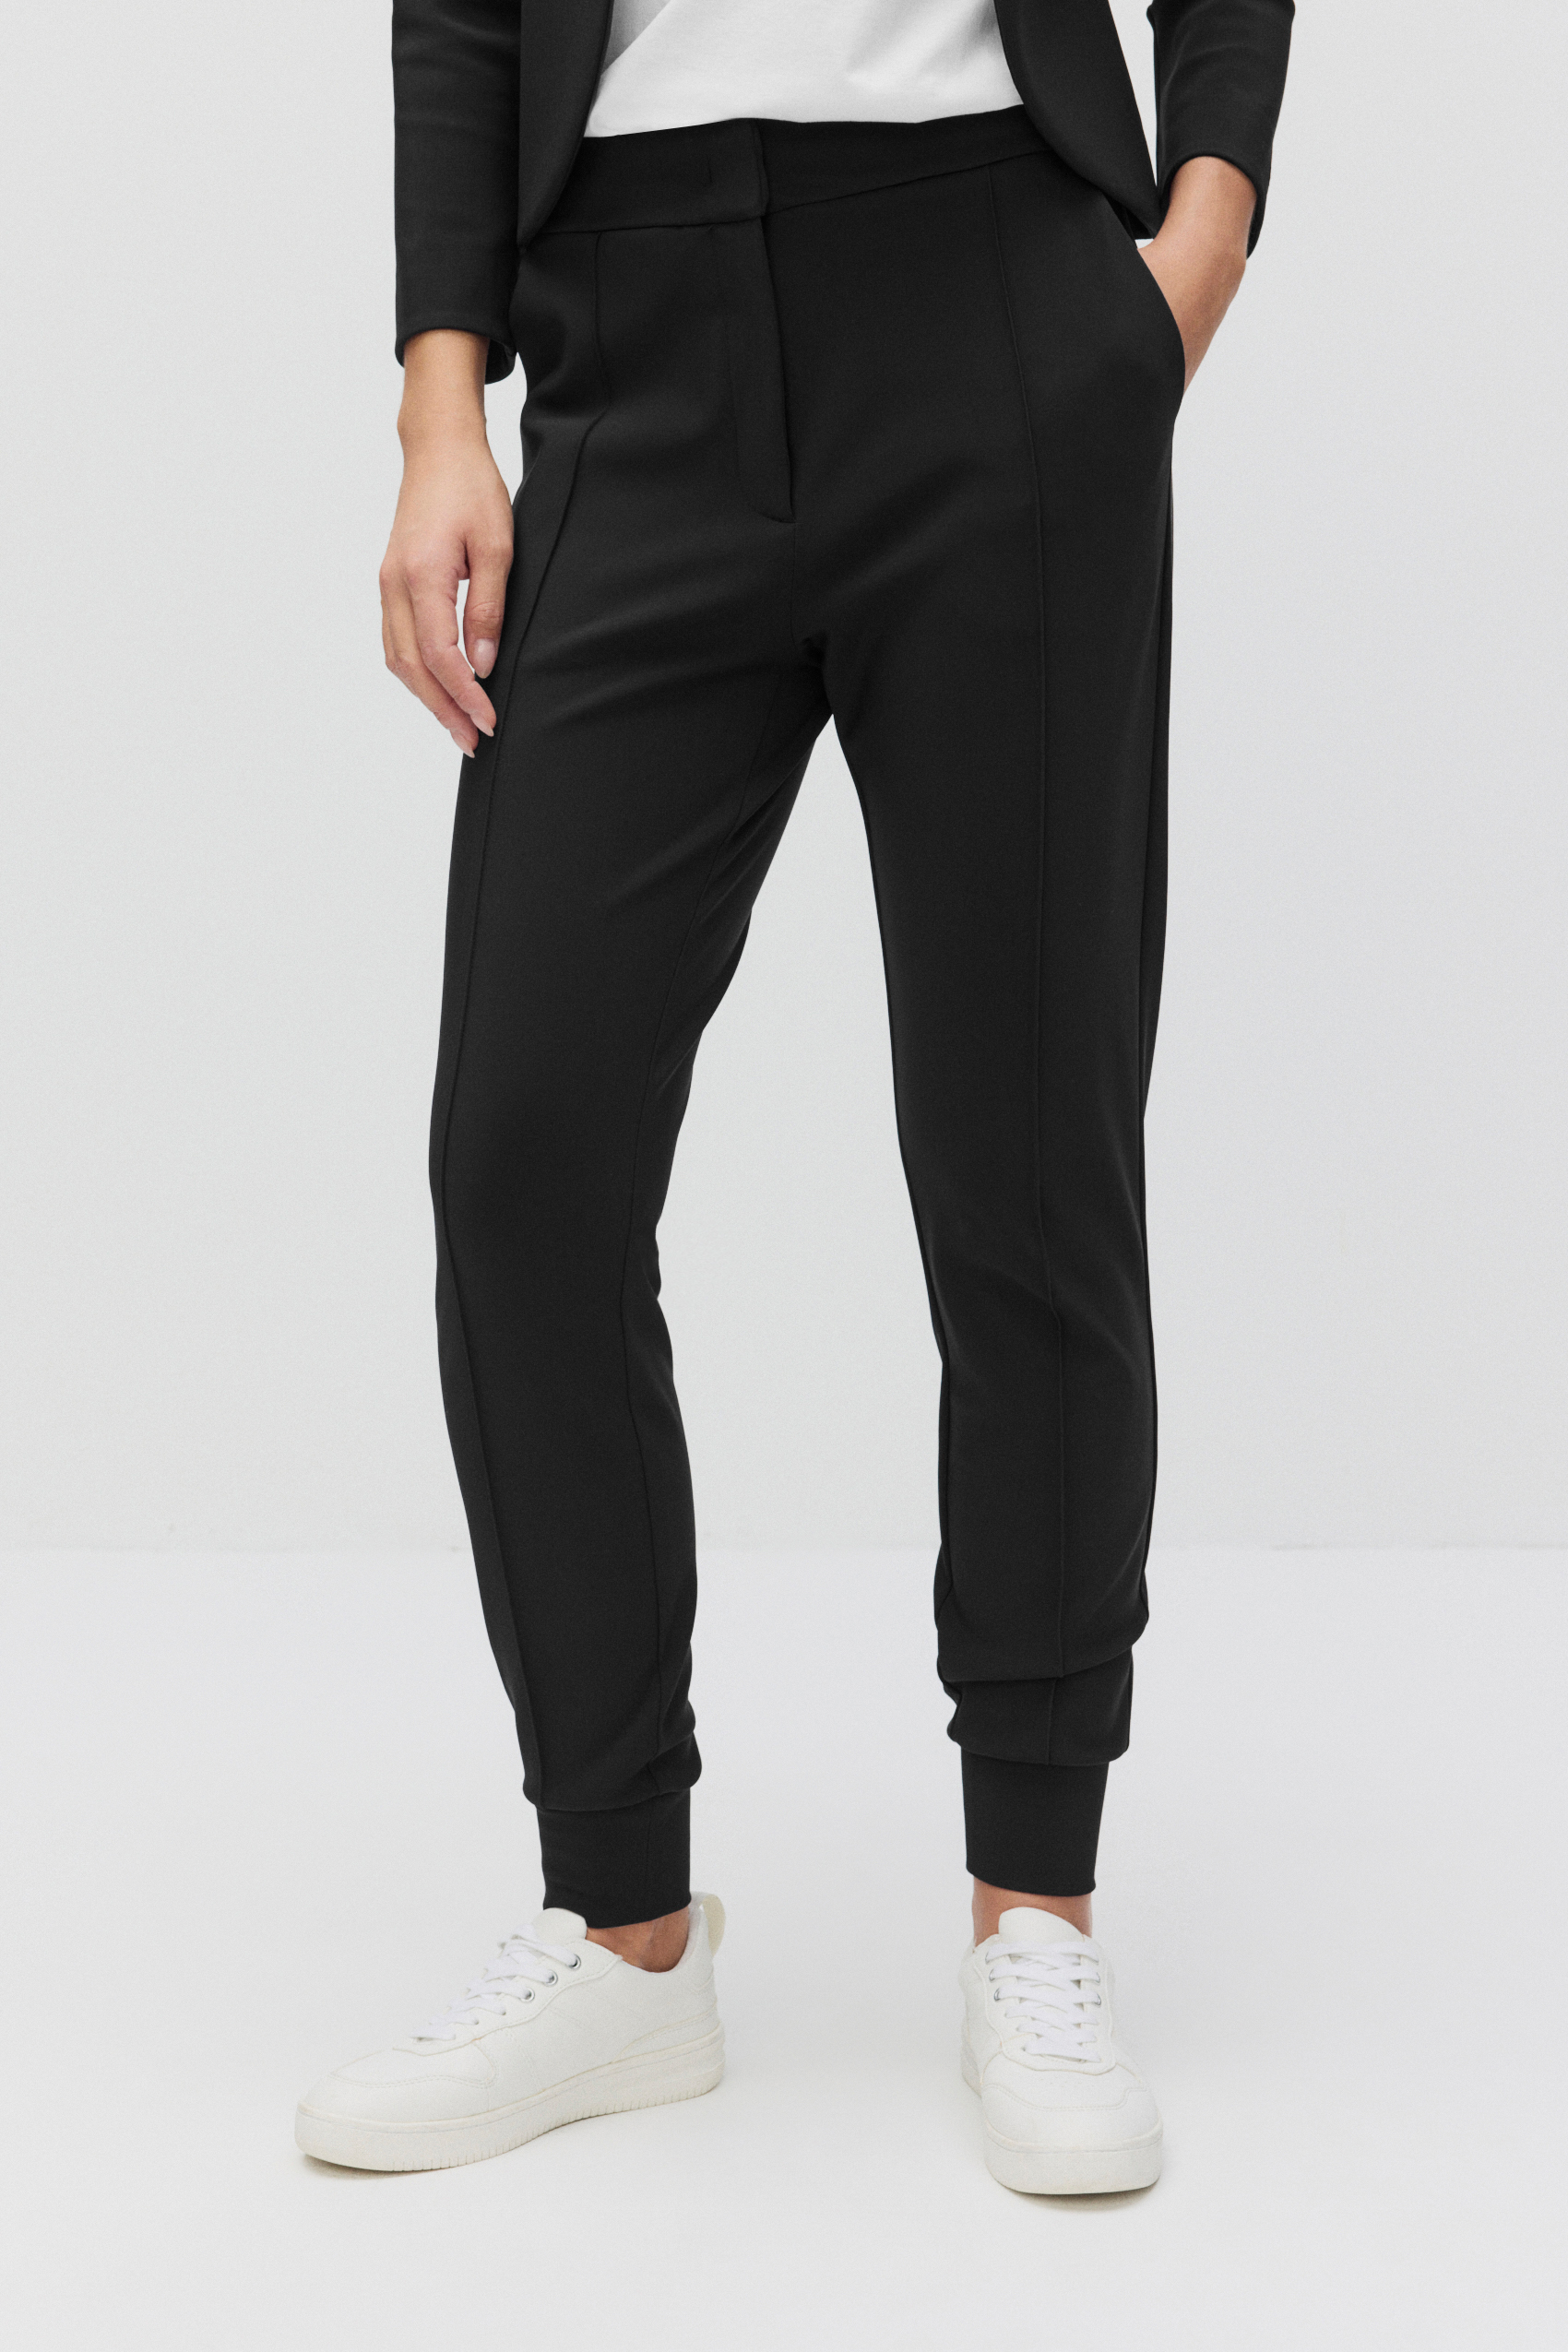 GASP -Sweatpants from GASP - Buy the Gasp sweat pants in our onlineshop